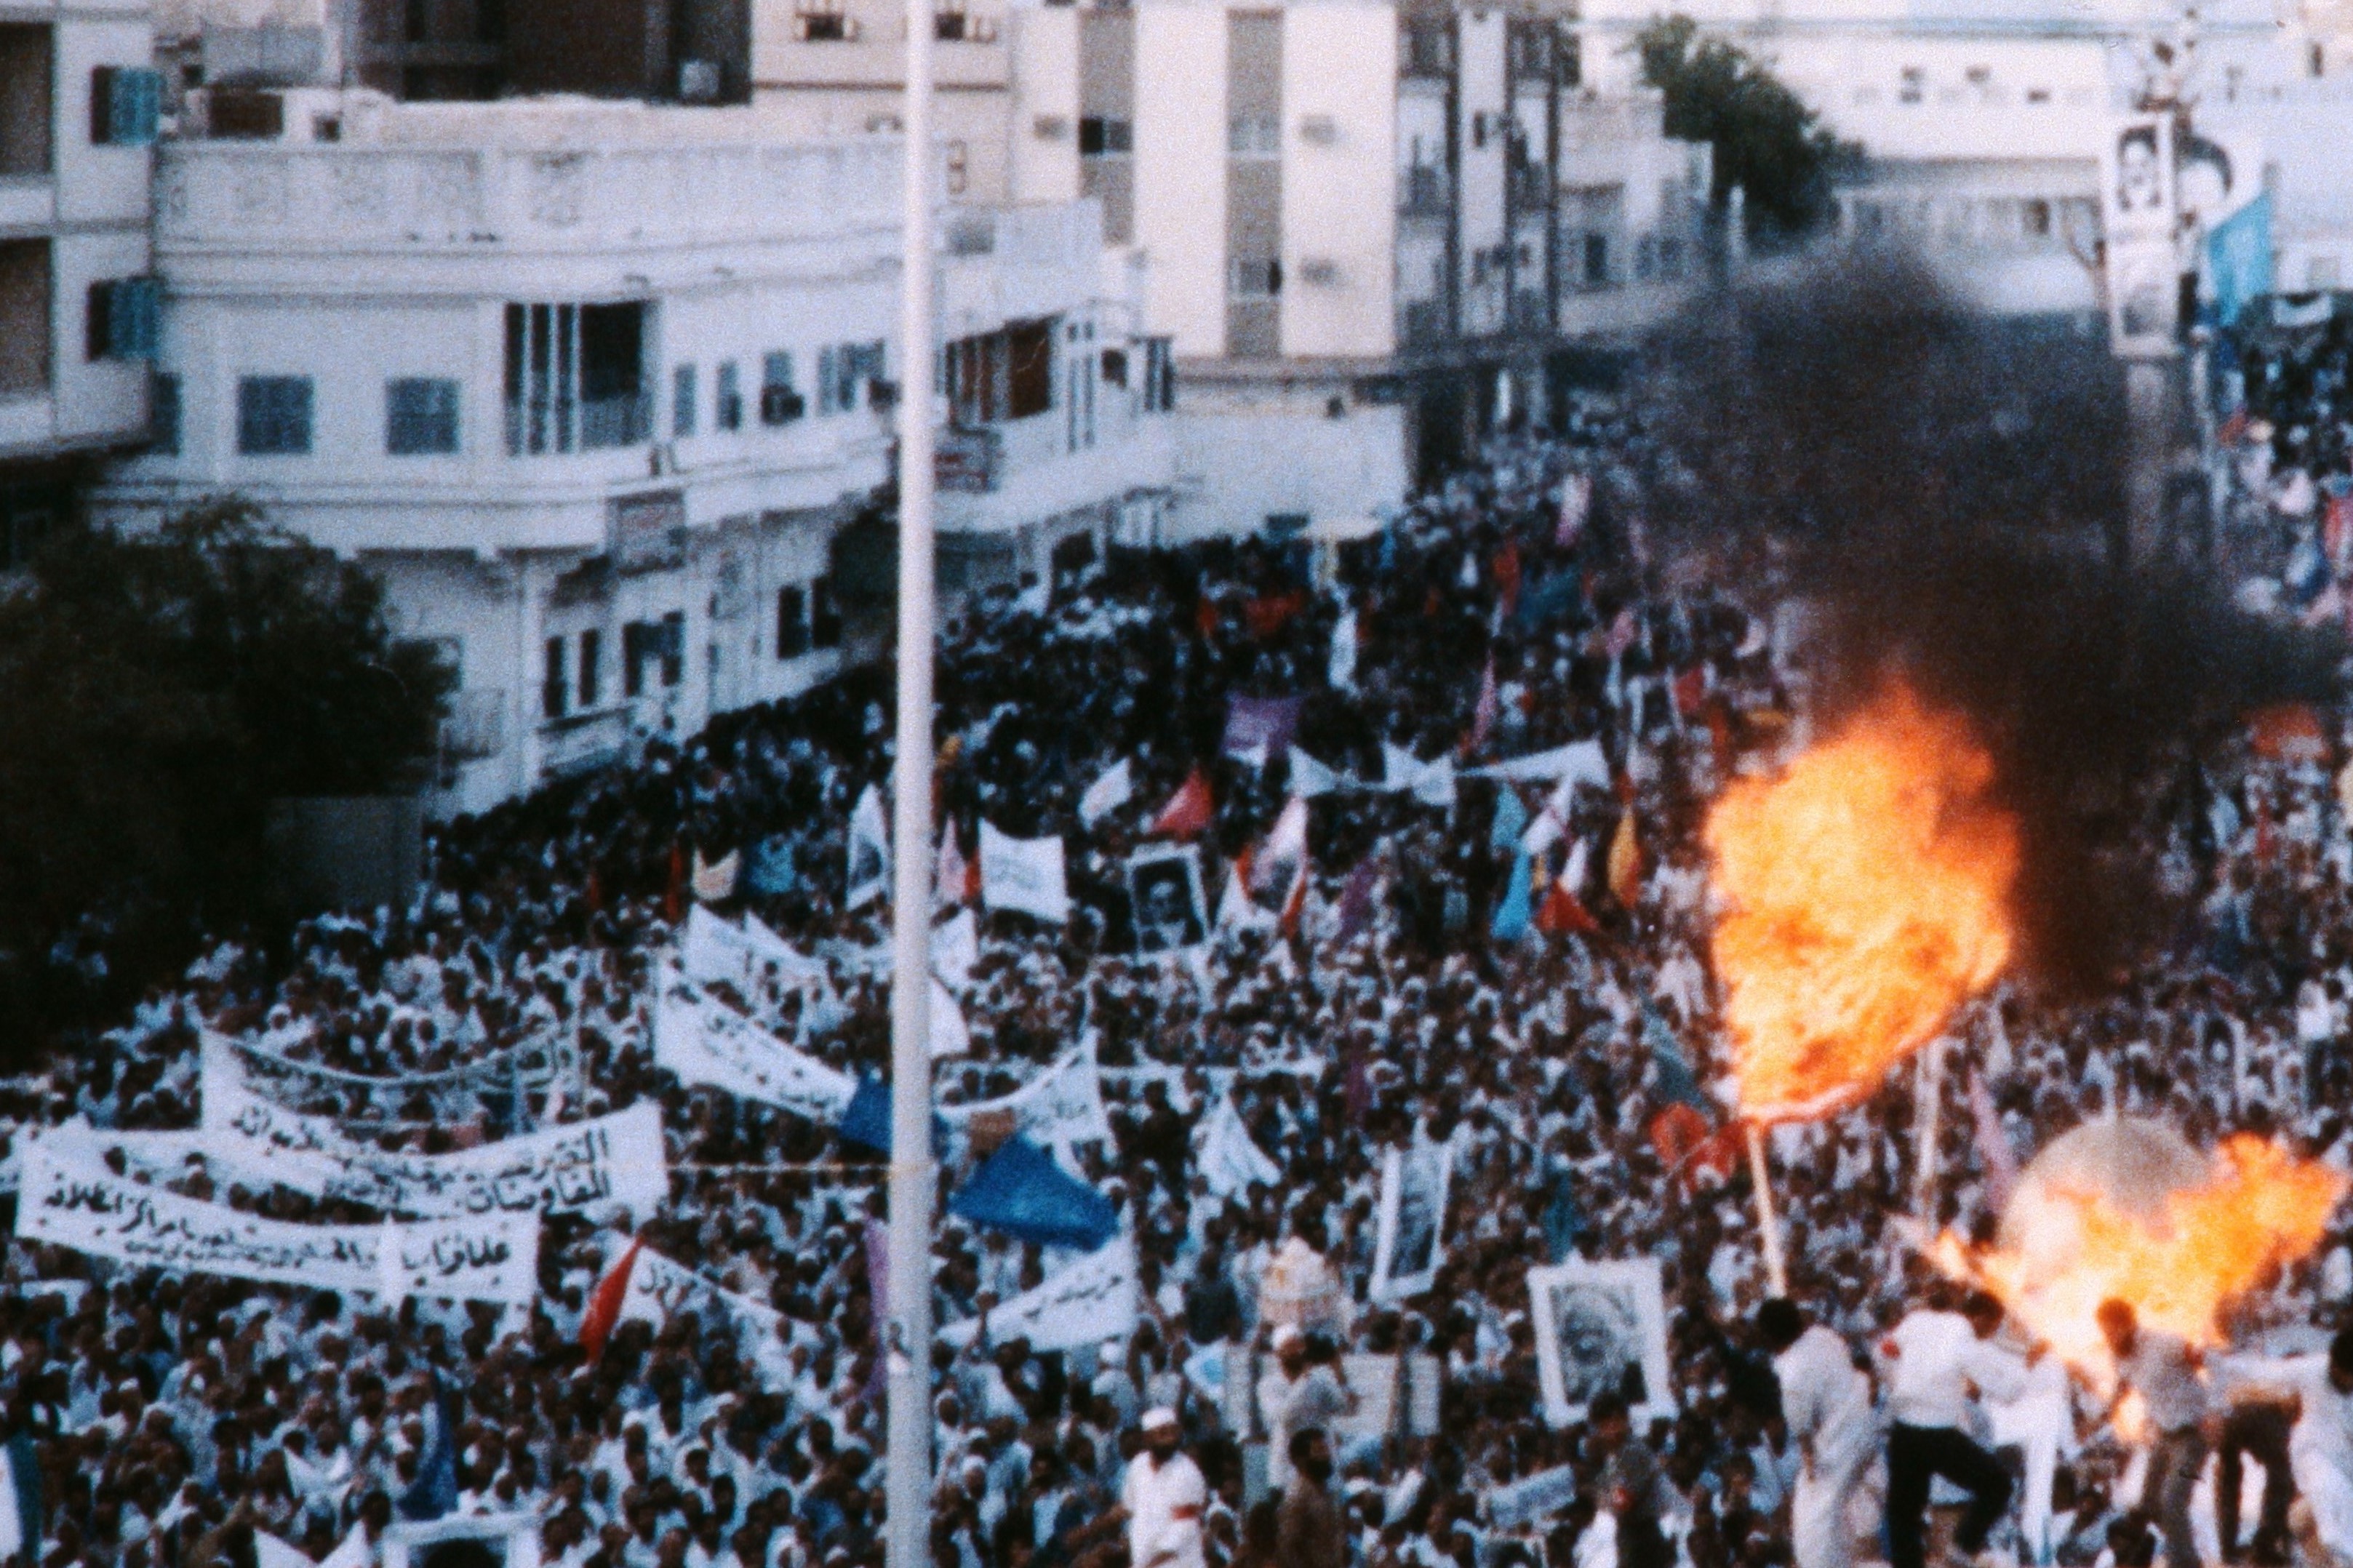 Iranian demonstrators clash during a rally protesting against the deployment of US Navy vessels in the Persian Gulf on August 02, 1987 in Mecca